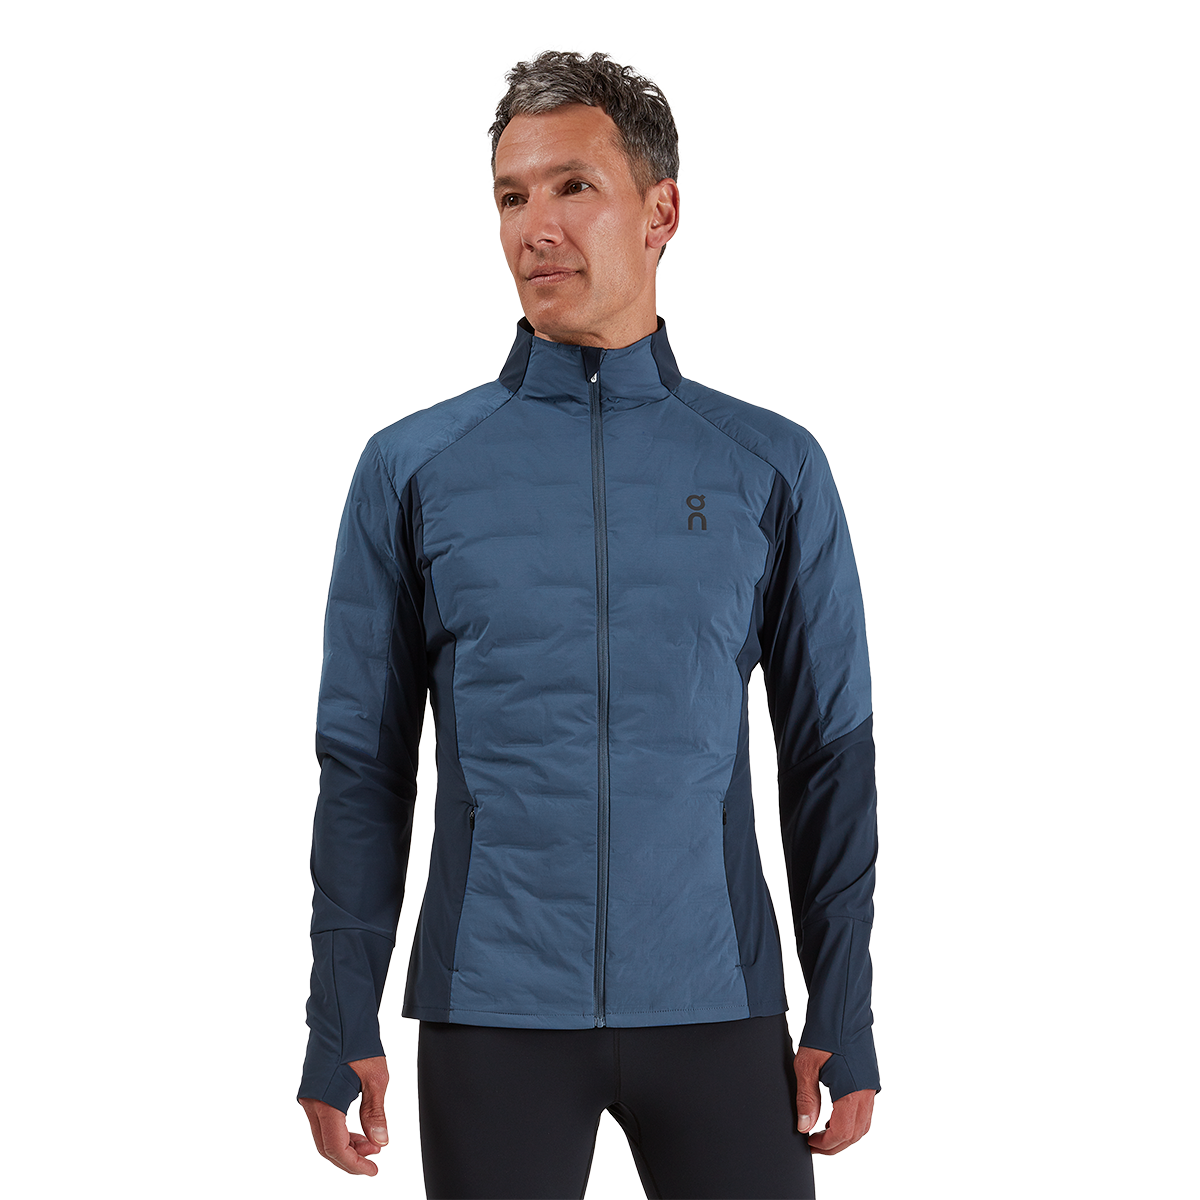 ON Running Jacket, , large image number null